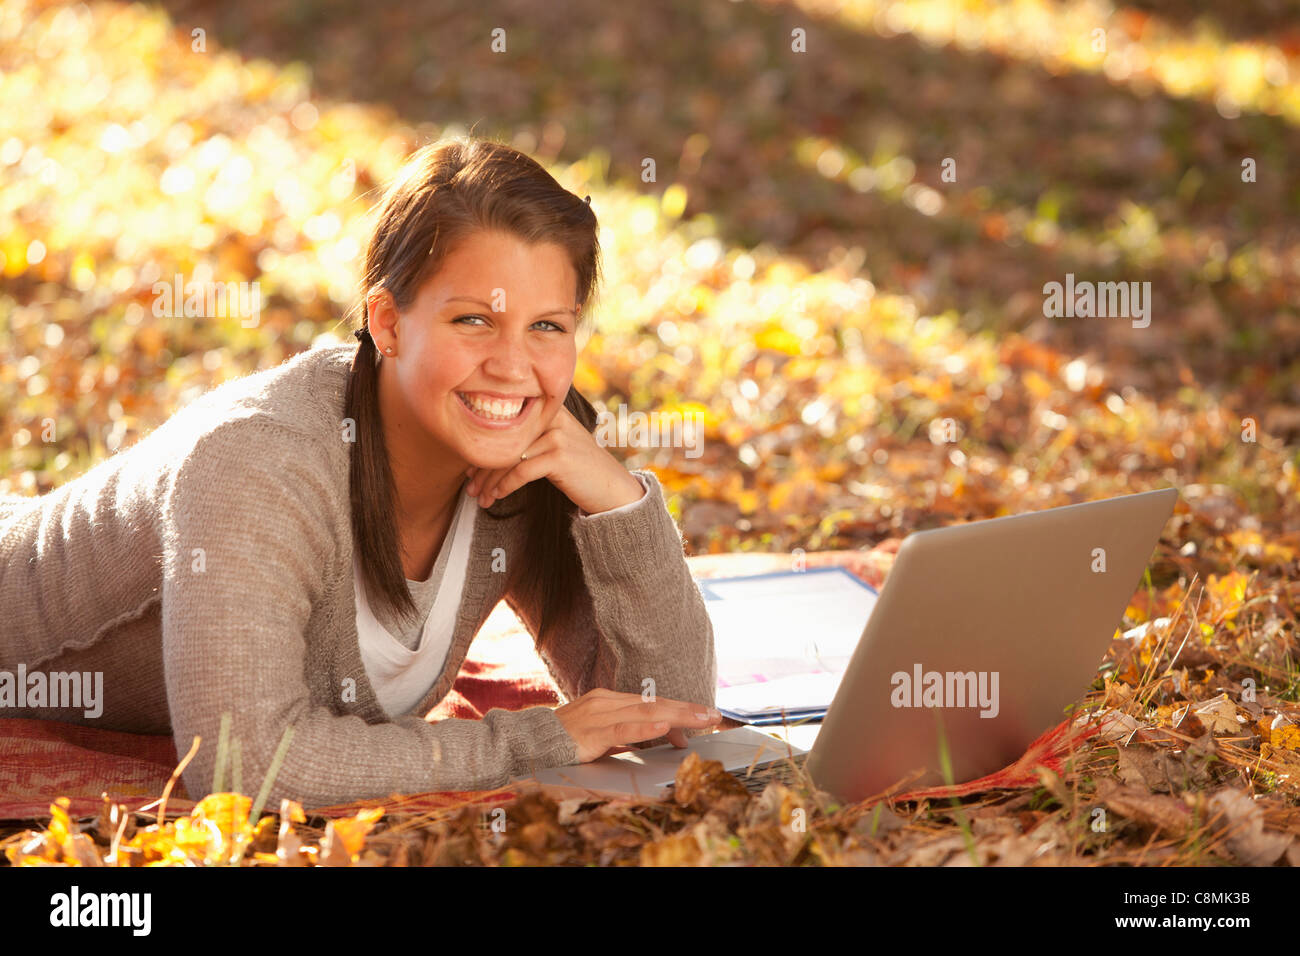 Caucasian teenager using laptop on ground Banque D'Images